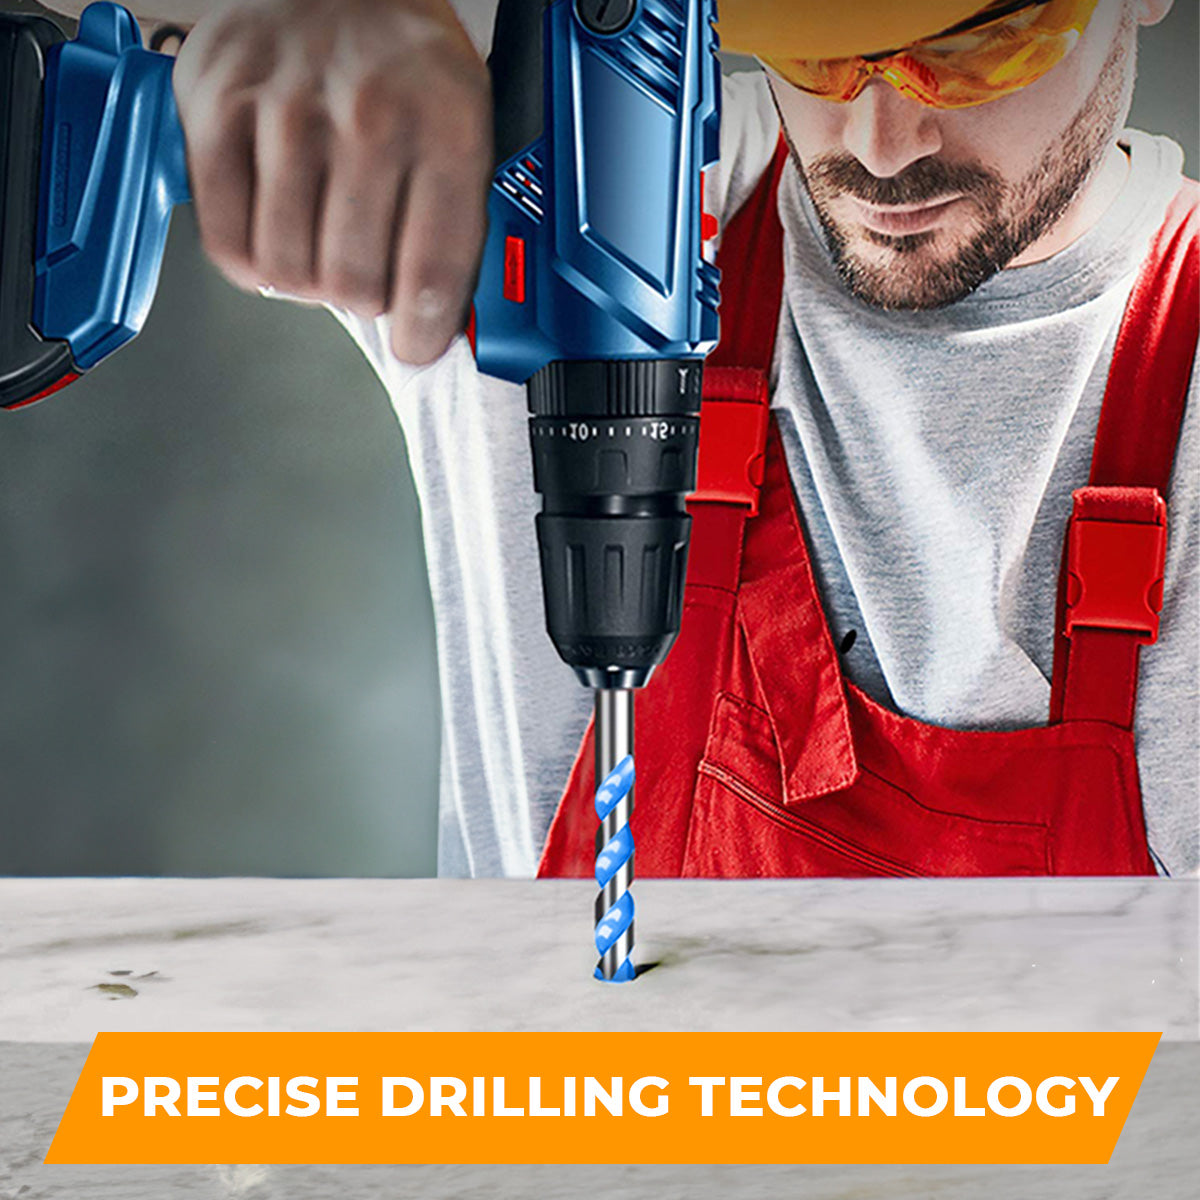 INDESTRUCTIBLE DRILLBITS™ 2.0 - Drill any material in seconds